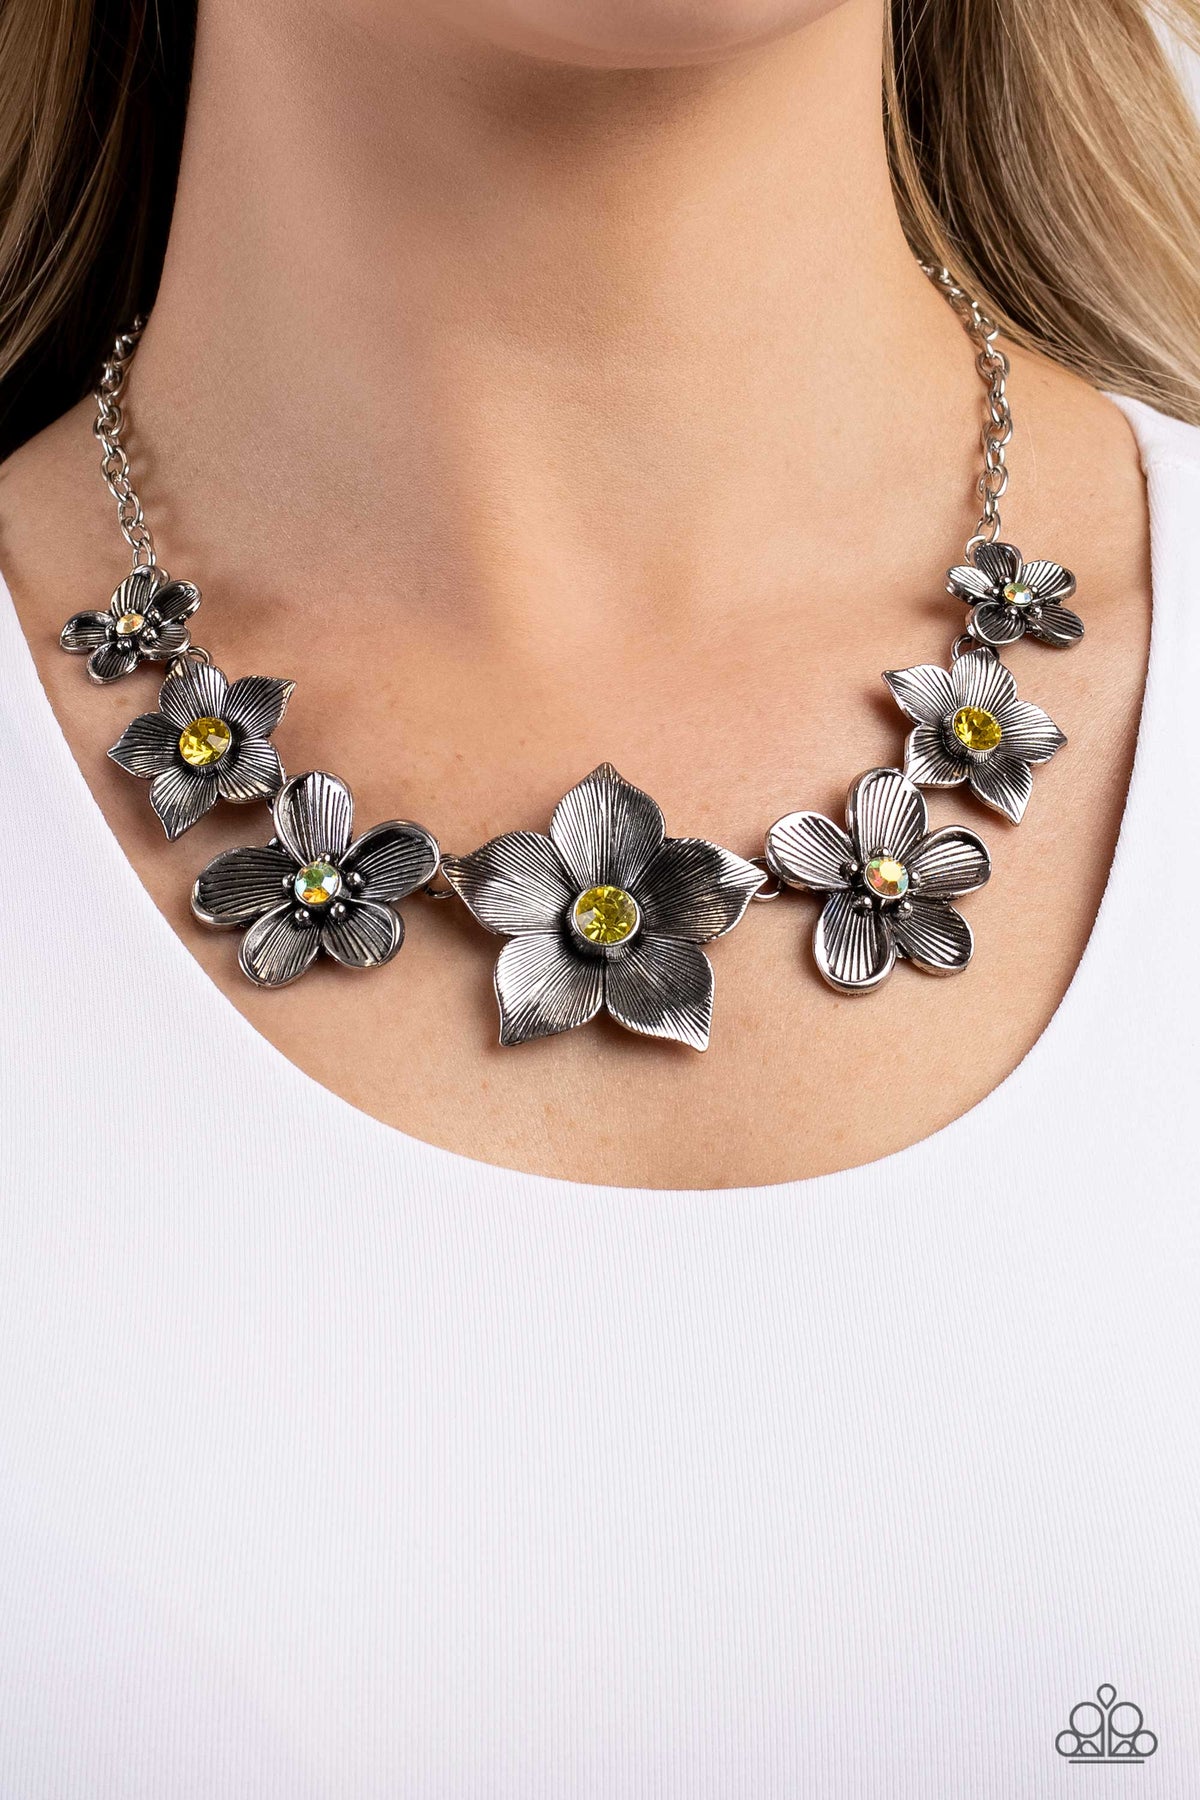 Free FLORAL Yellow Flower Necklace - Paparazzi Accessories-on model - CarasShop.com - $5 Jewelry by Cara Jewels